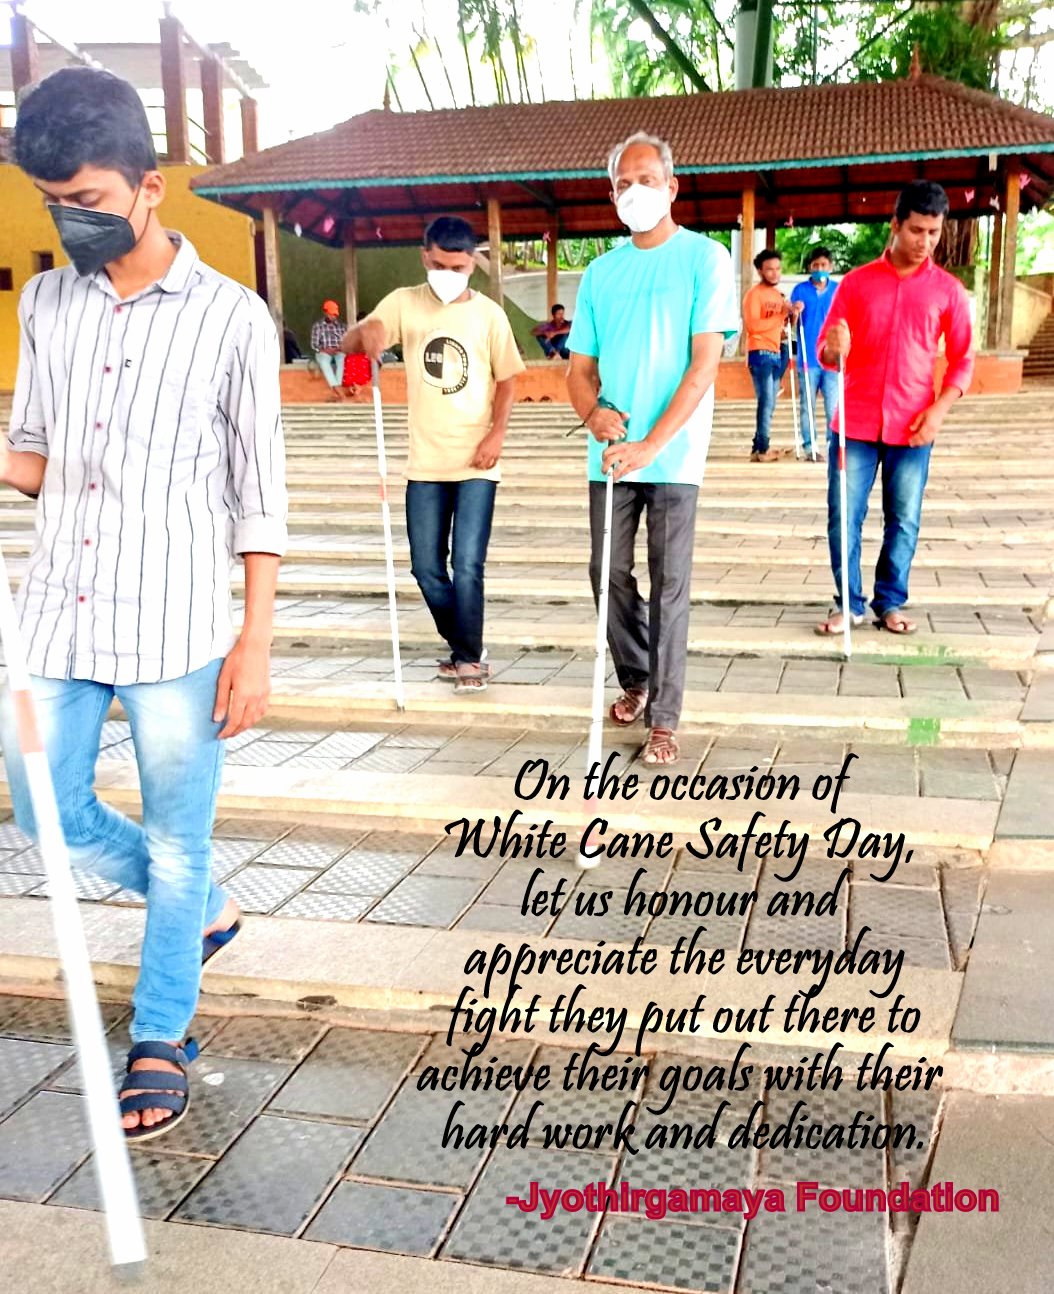 On the occasion of White Cane Safety Day let us honour and appreciate the everyday fight they put out there to achieve their goals with their hard work and dedication